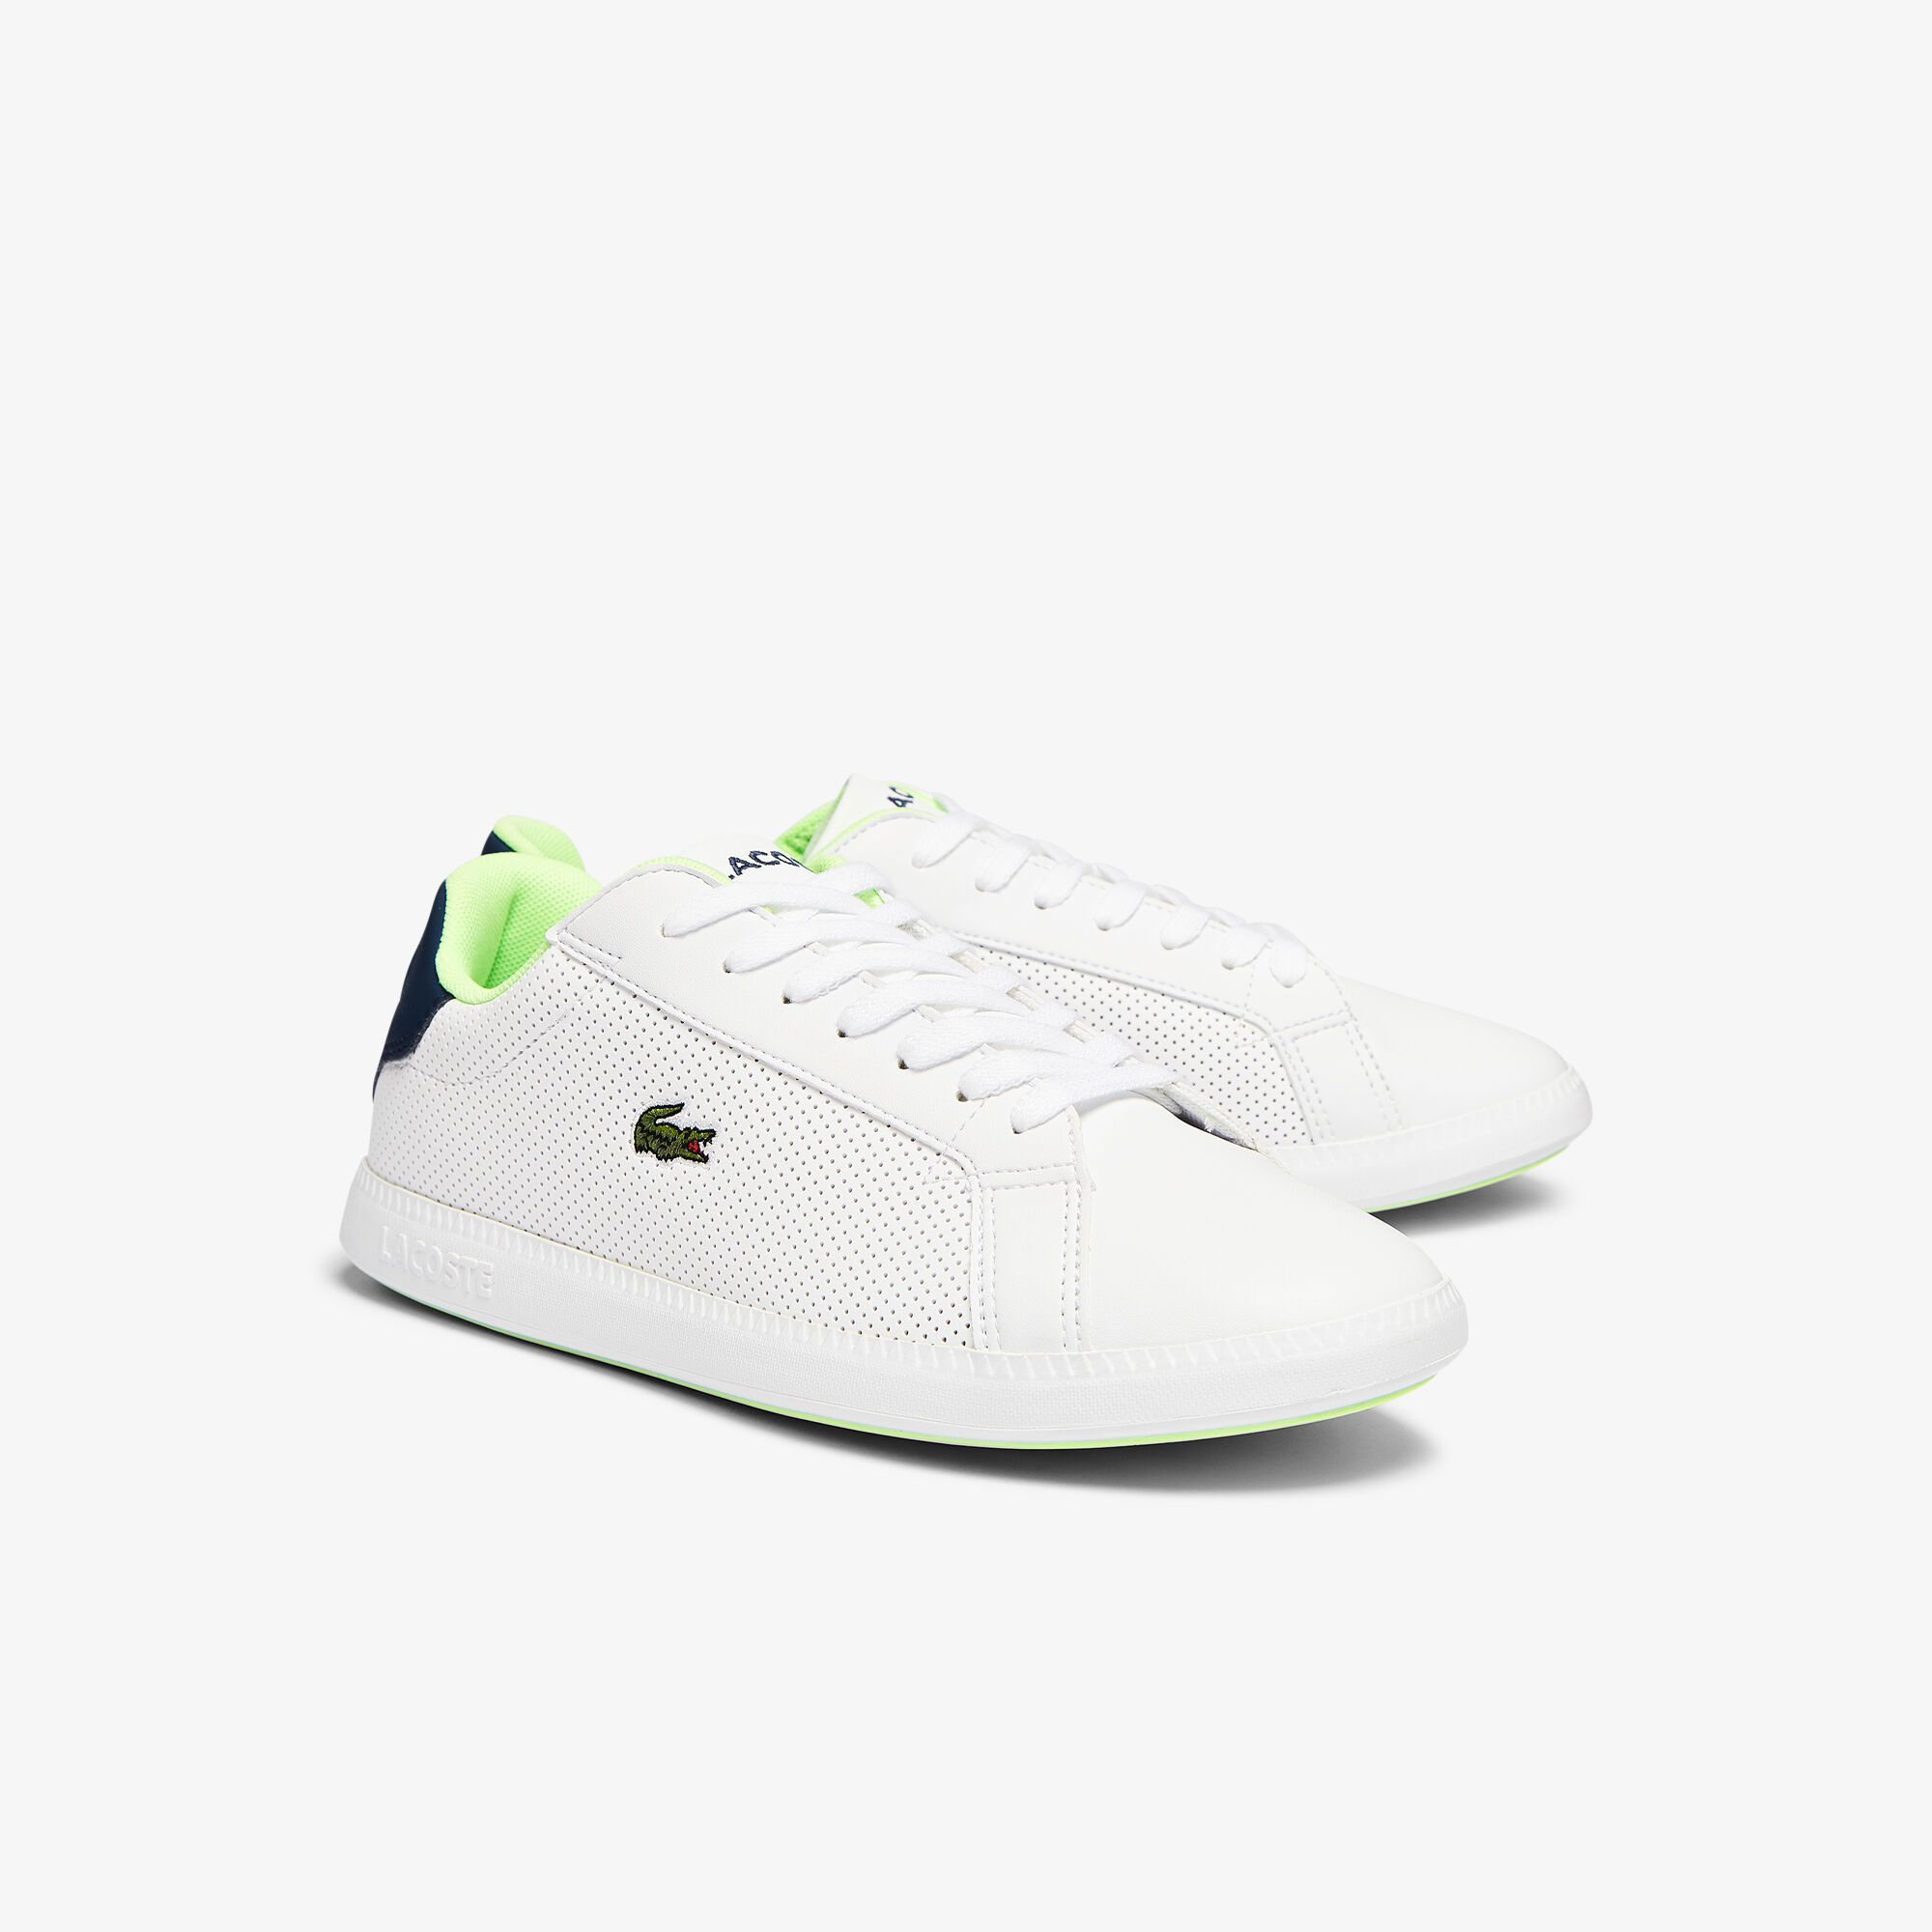 Juniors' Graduate Synthetic Perforated Trainers